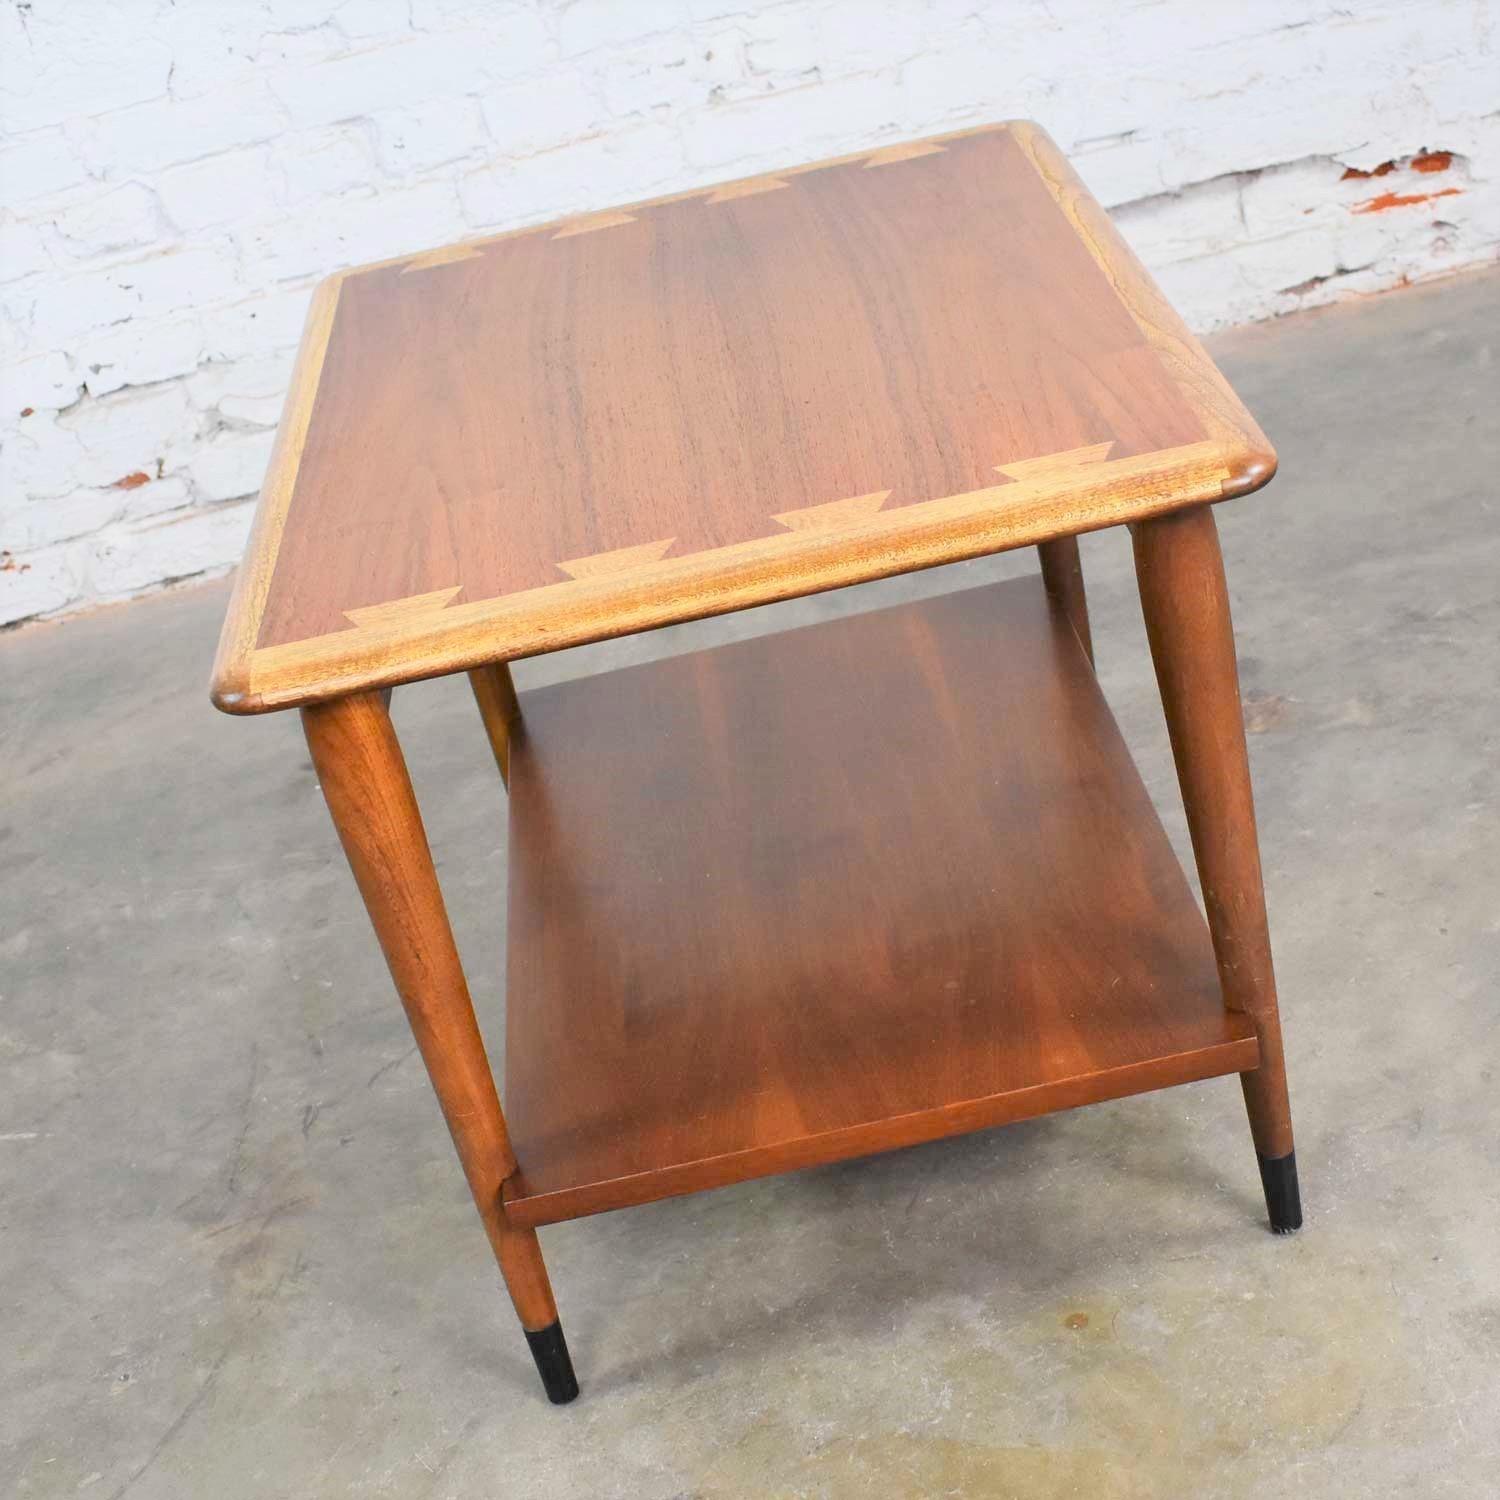 Mid-Century Modern Acclaim Series 900-05 Walnut Lamp Table End Table by Andre Bus for Lane